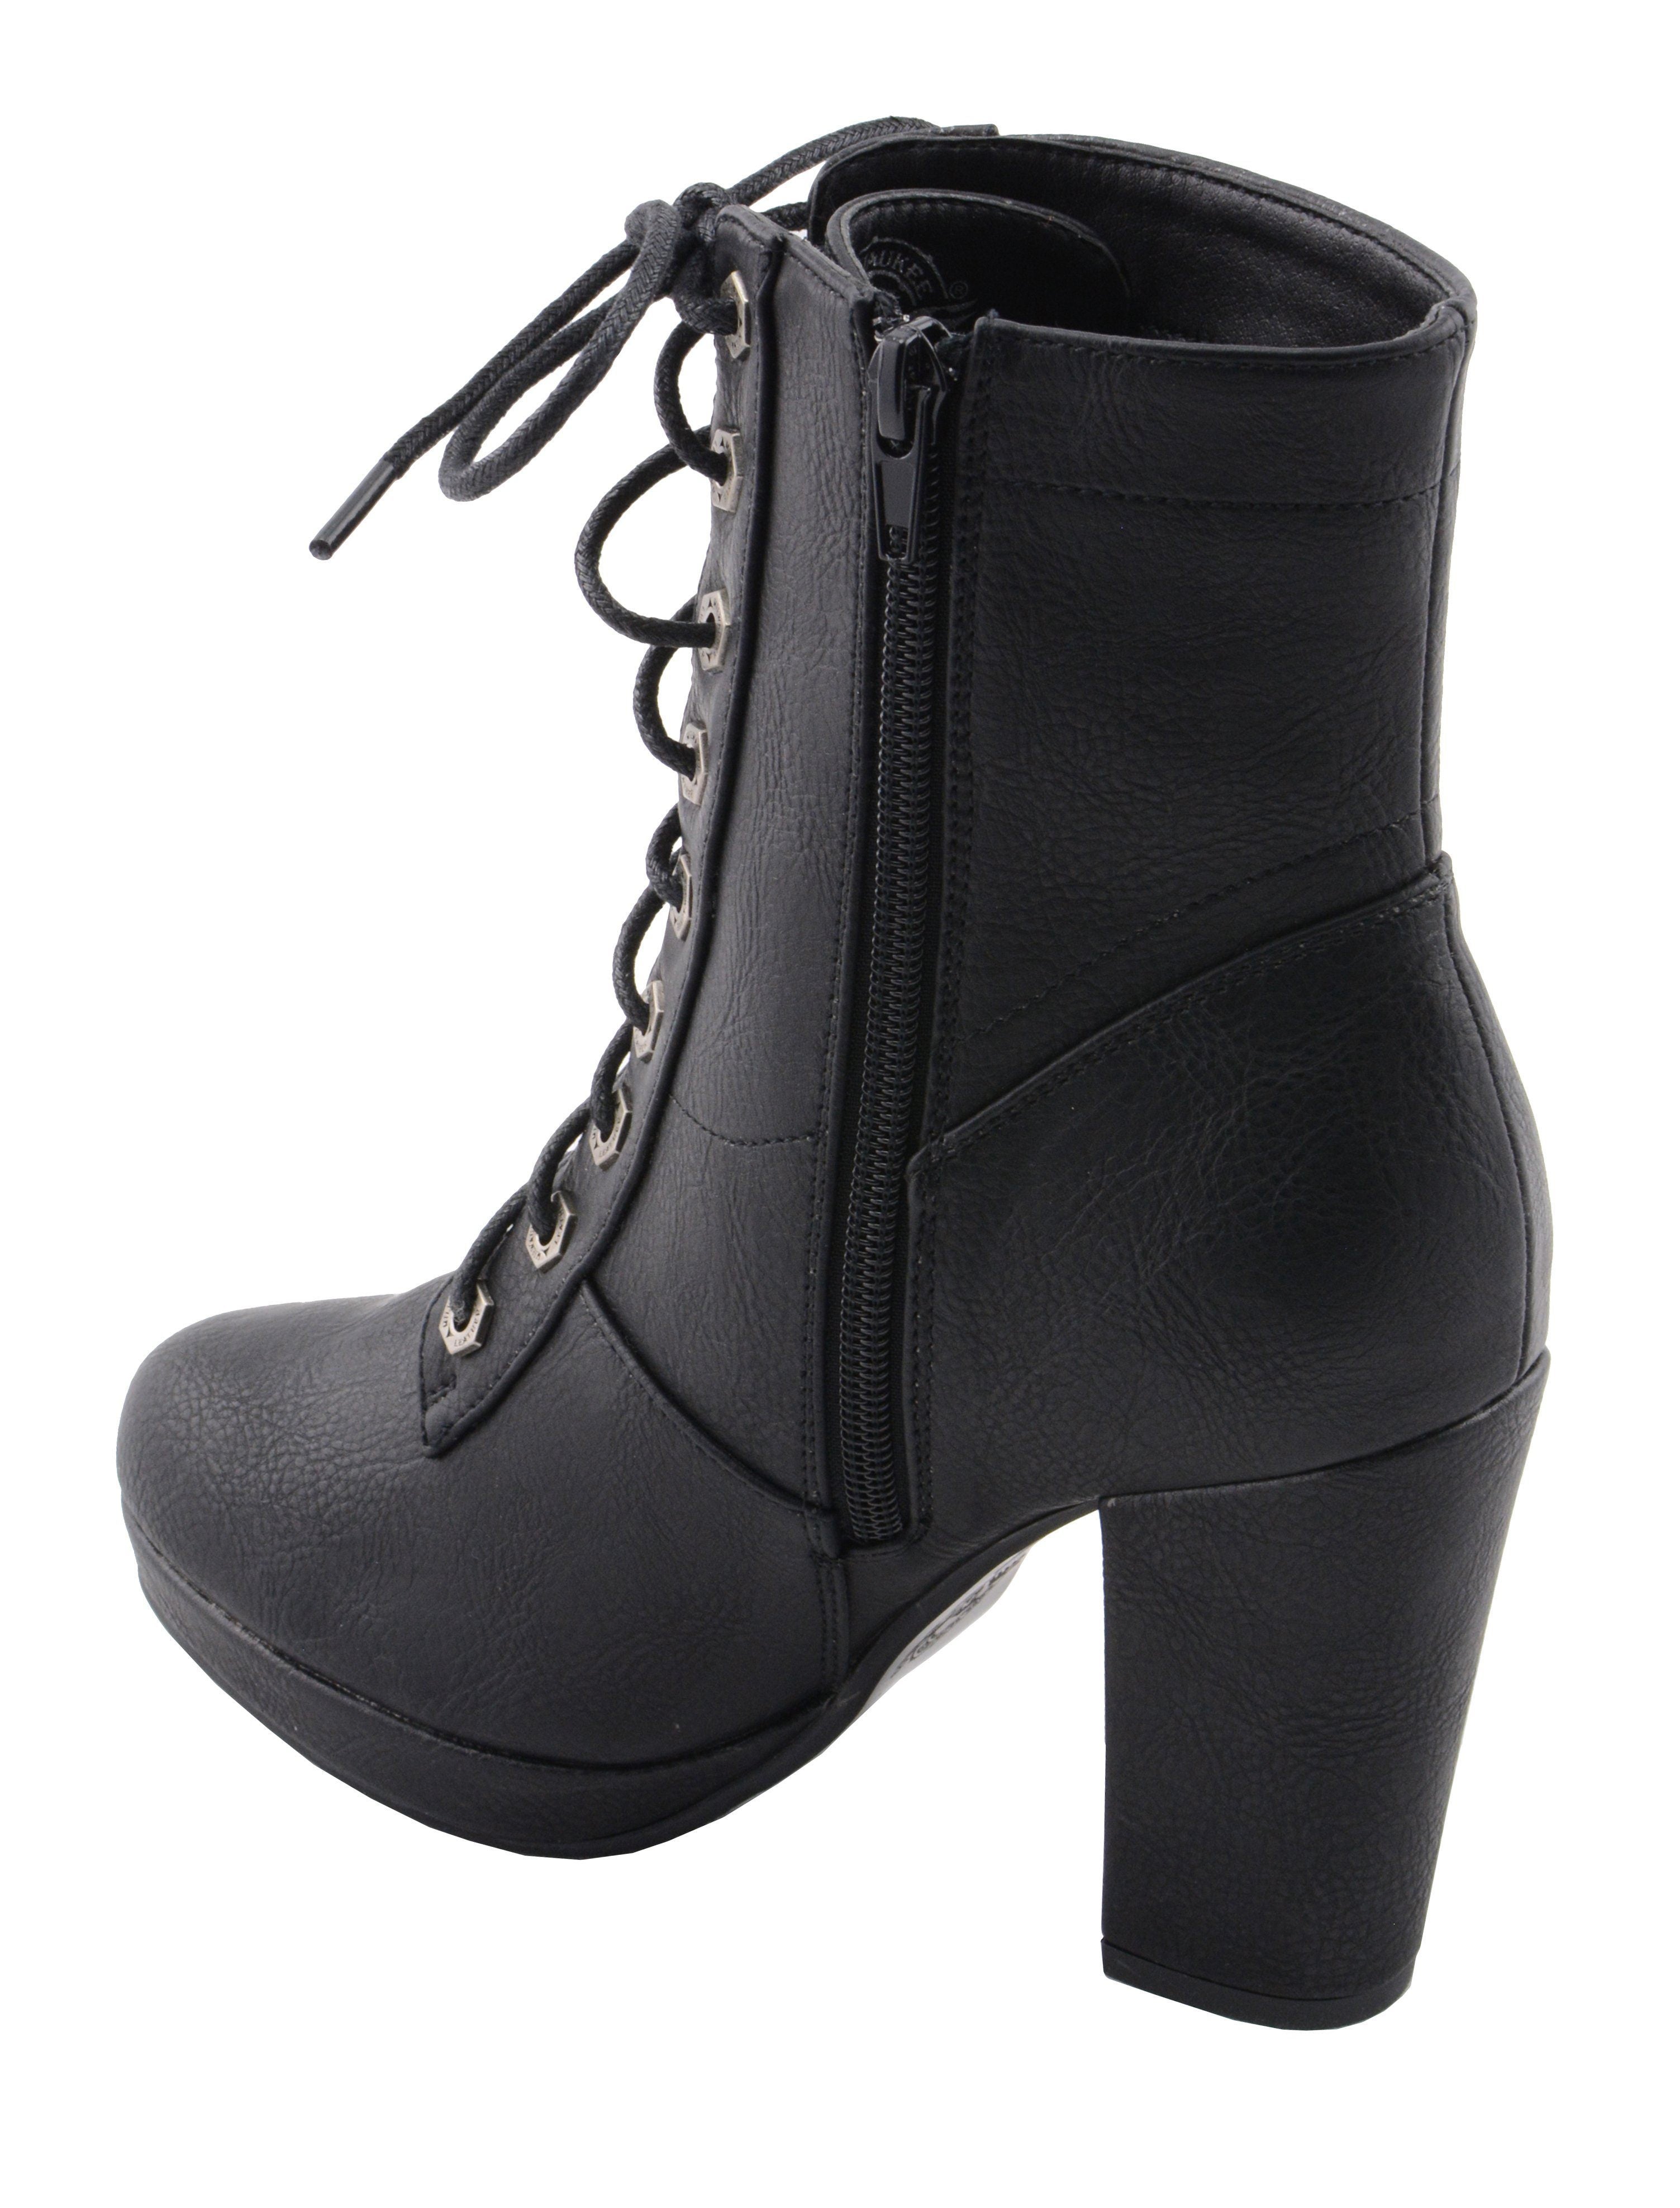 Milwaukee Performance MBL9418 Women's Black Lace-Up Platform Boots with Studded Accents